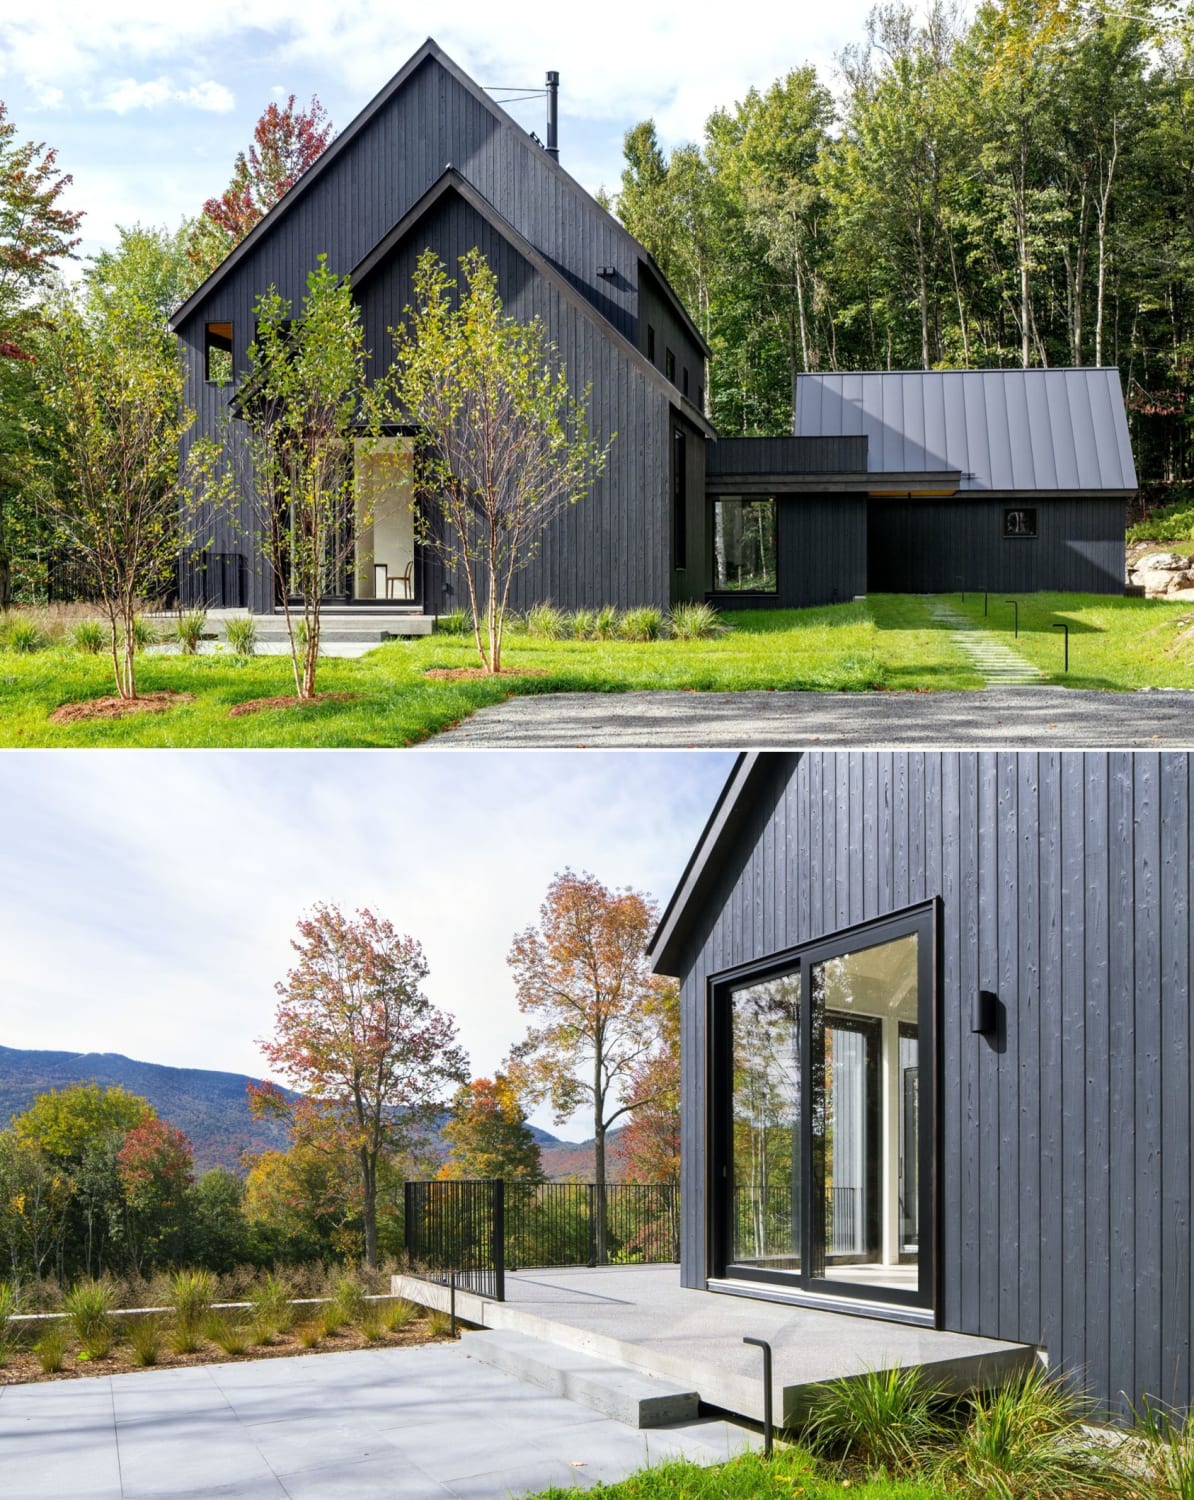 Rural hillside property clad in charred wood overlooking Green Mountains, Fayston, Vermont by Elizabeth Herrmann Architecture (Photo: Lindsay Selin)